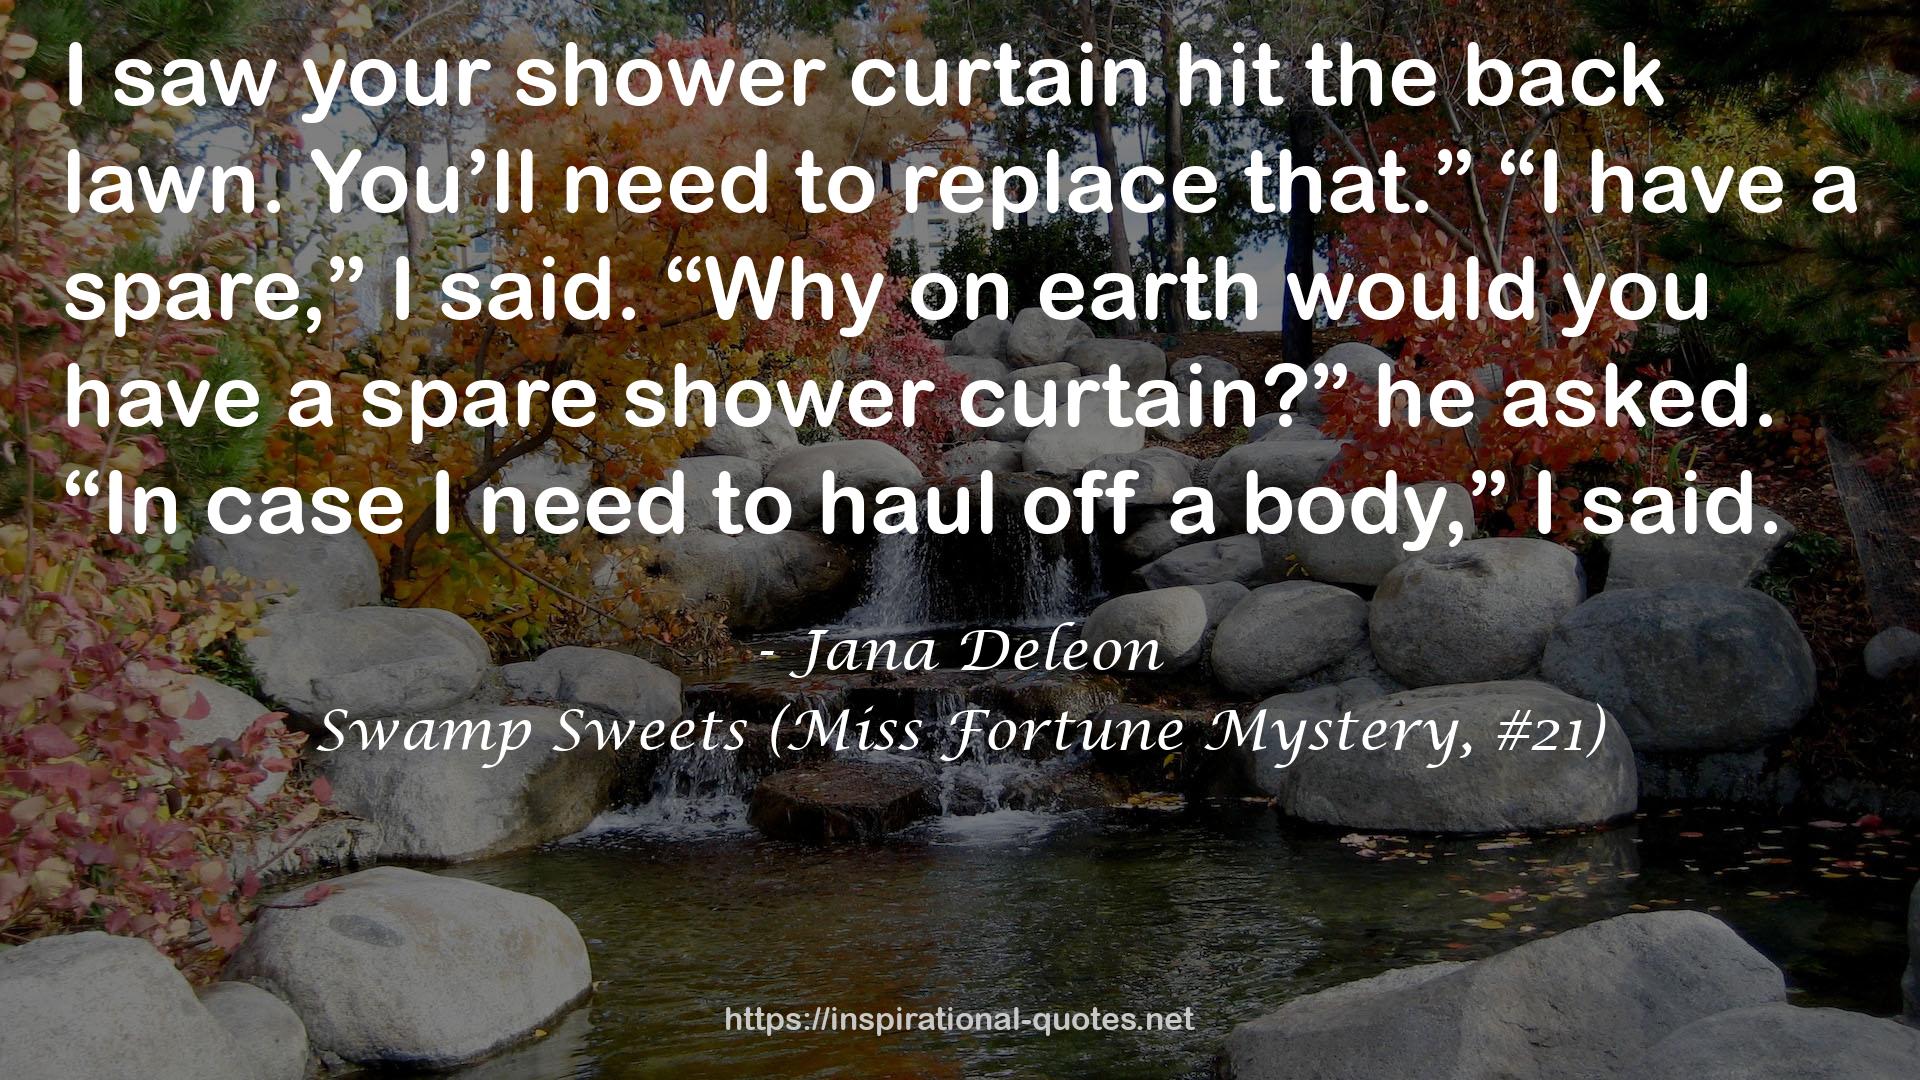 Swamp Sweets (Miss Fortune Mystery, #21) QUOTES